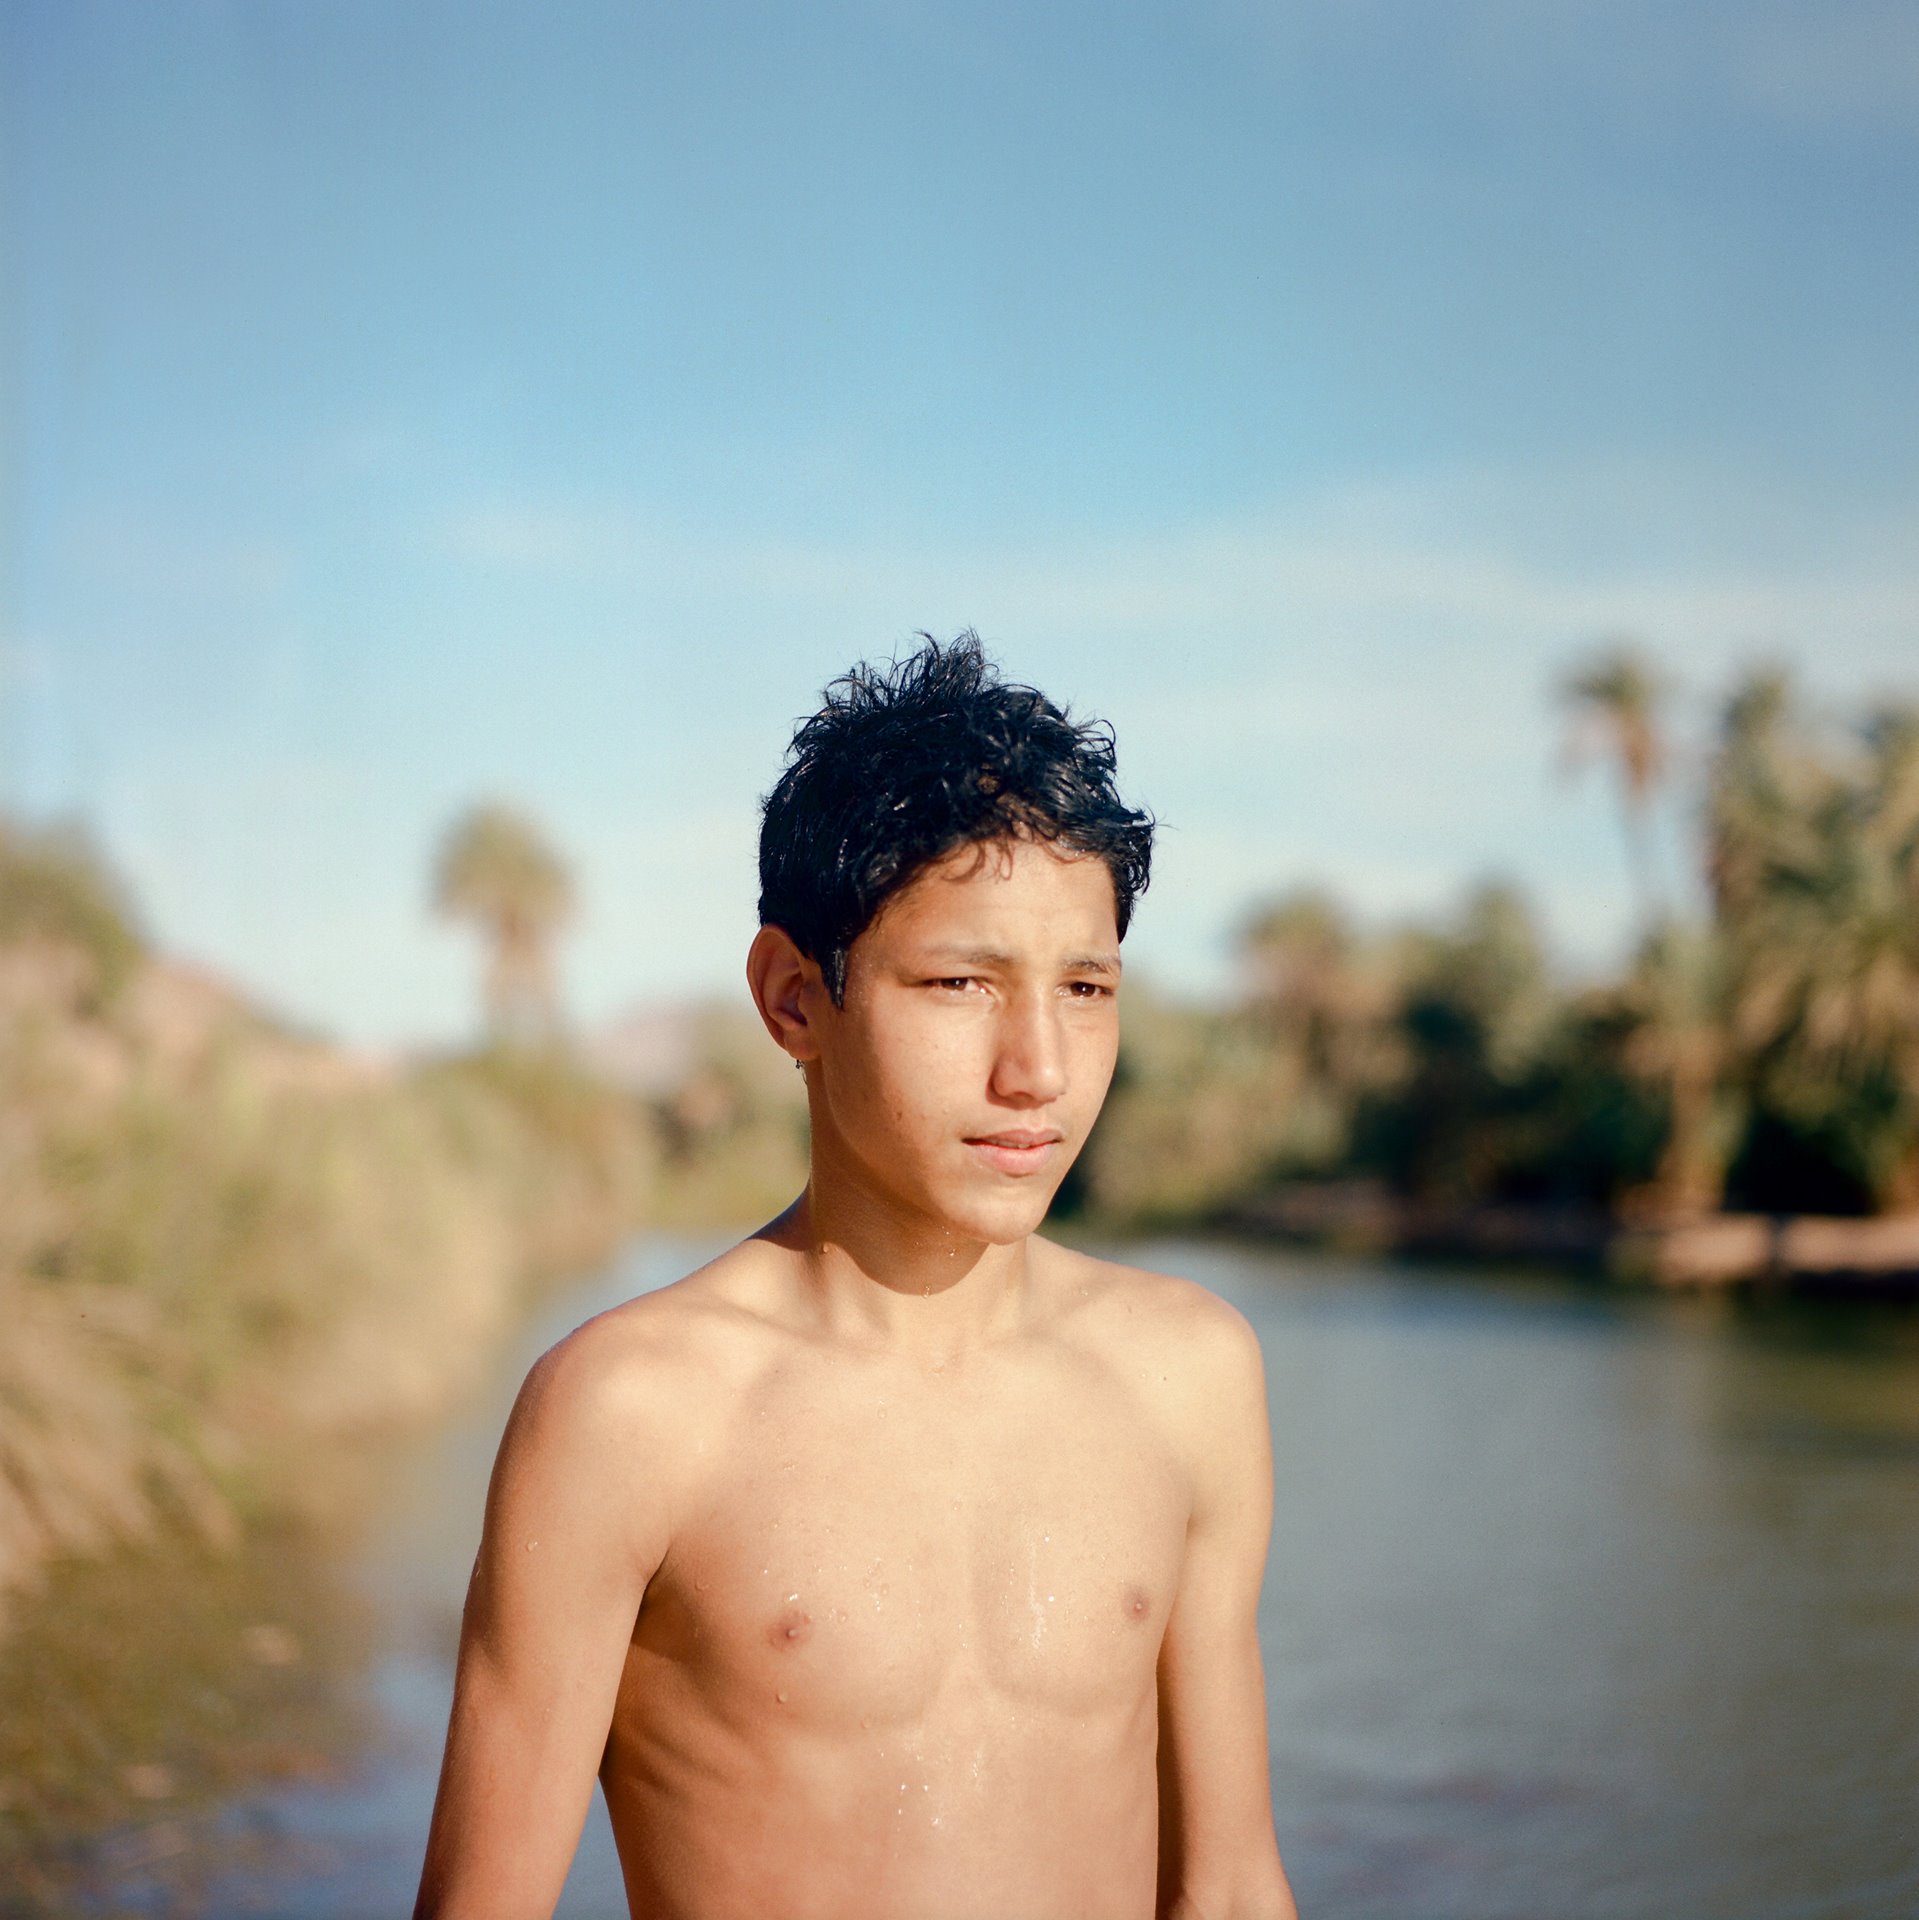 Mustapha (14), who lives at Taghjijt Oasis in southern Morocco, has dropped out of school to help on the family farm. He enjoys swimming with friends when work is finished, and would like to continue working as a farmer.